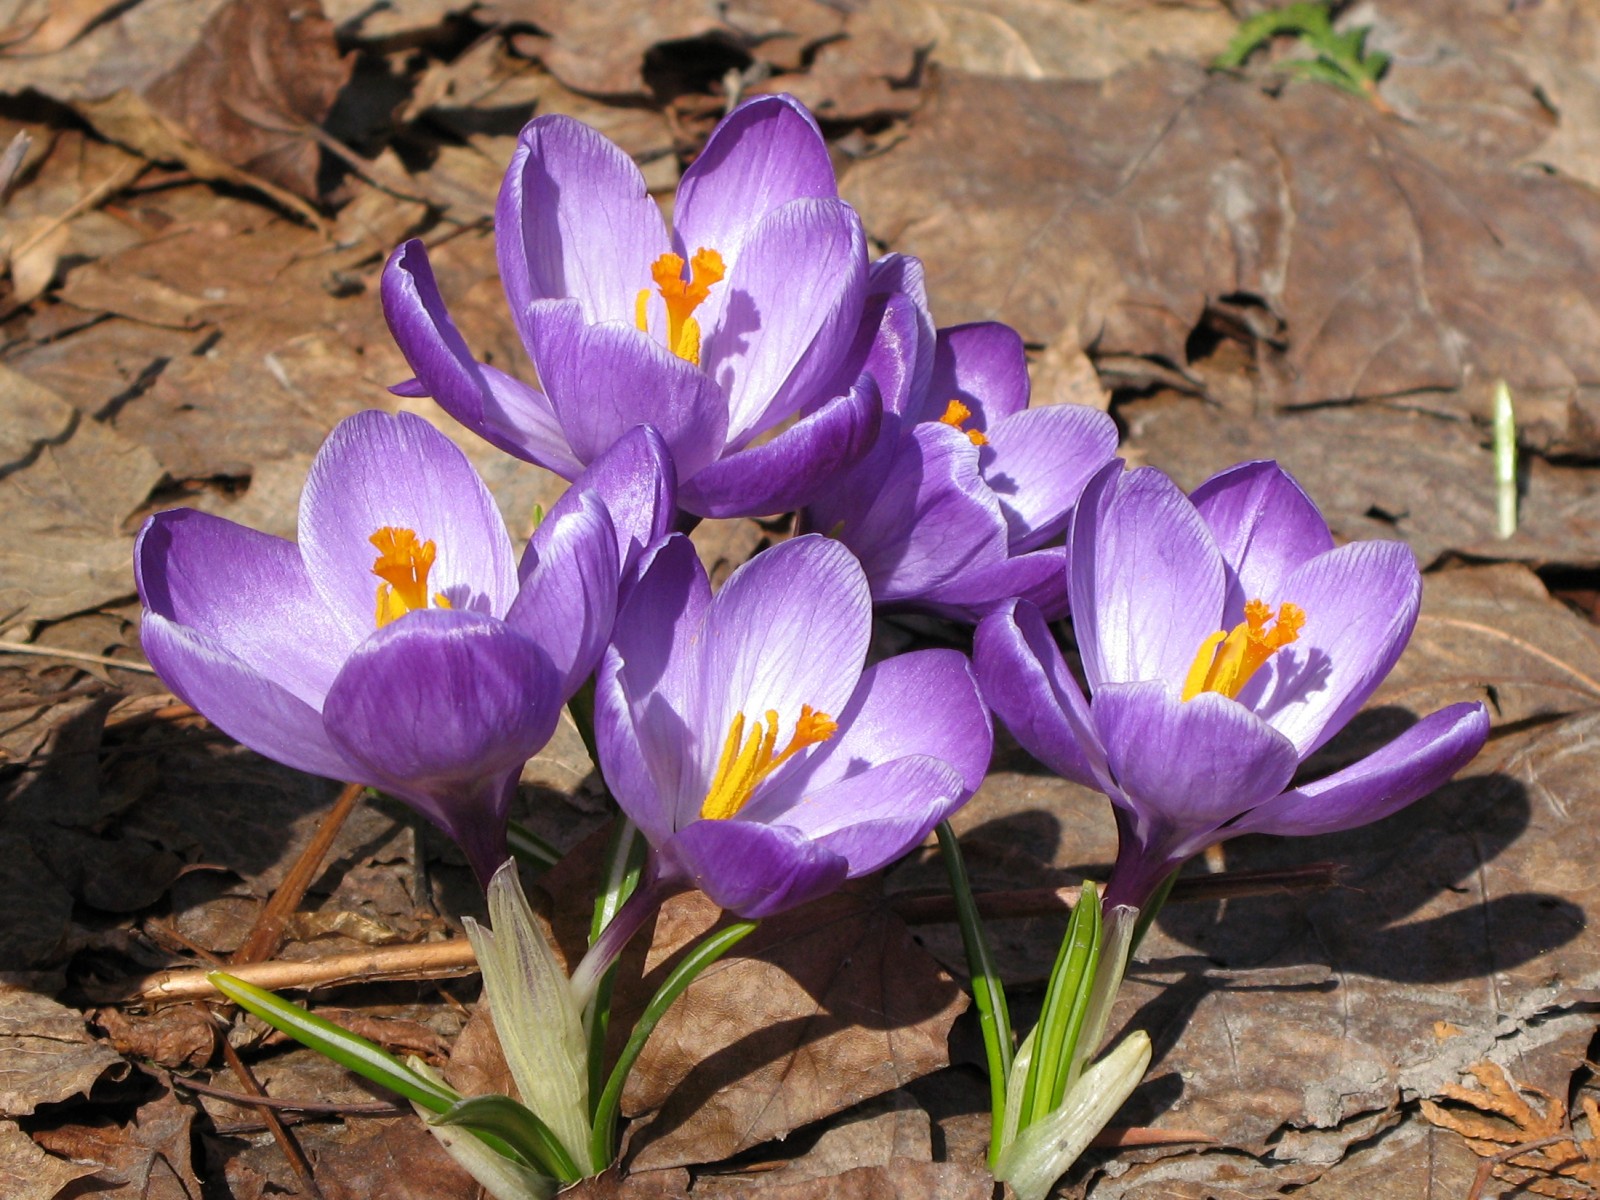 a close up of purple flowers near one another on the ground